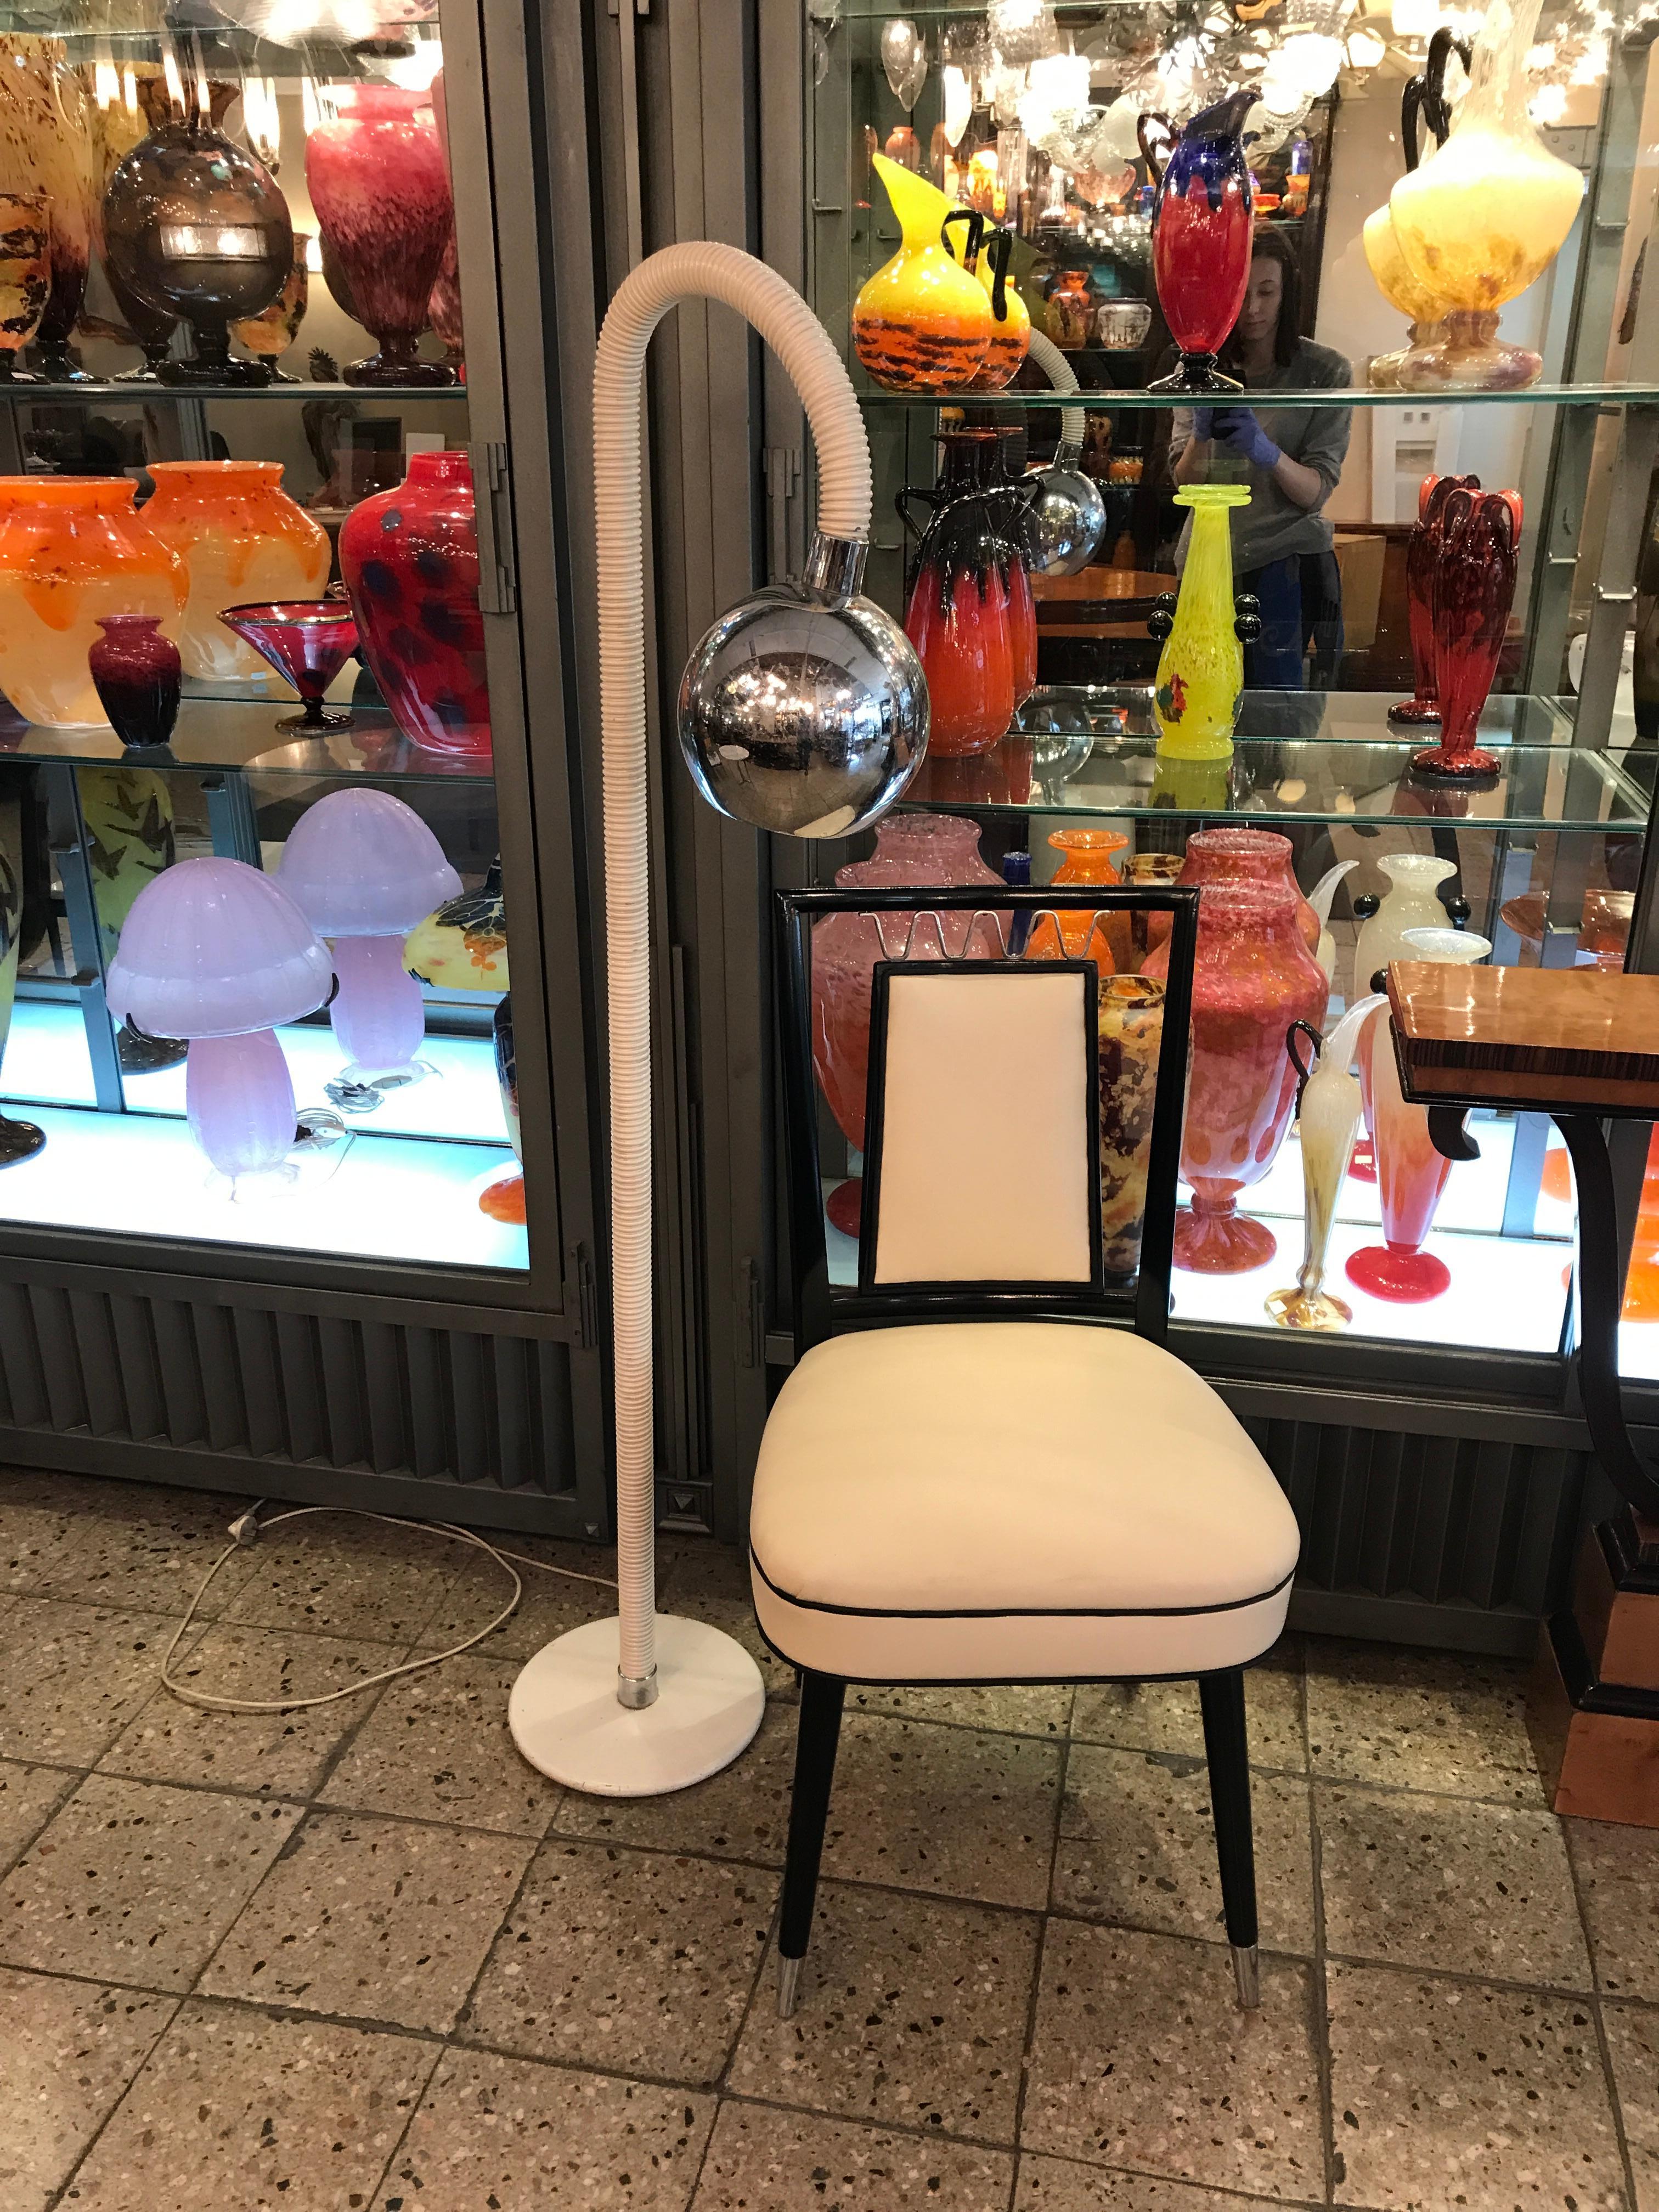 Floor lamp 
Material: chrome and plastic
You want to live in the golden years, those are the floor lamps that your project needs.
We have specialized in the sale of Art Deco and Art Nouveau styles since 1982.
Pushing the button that reads 'View All